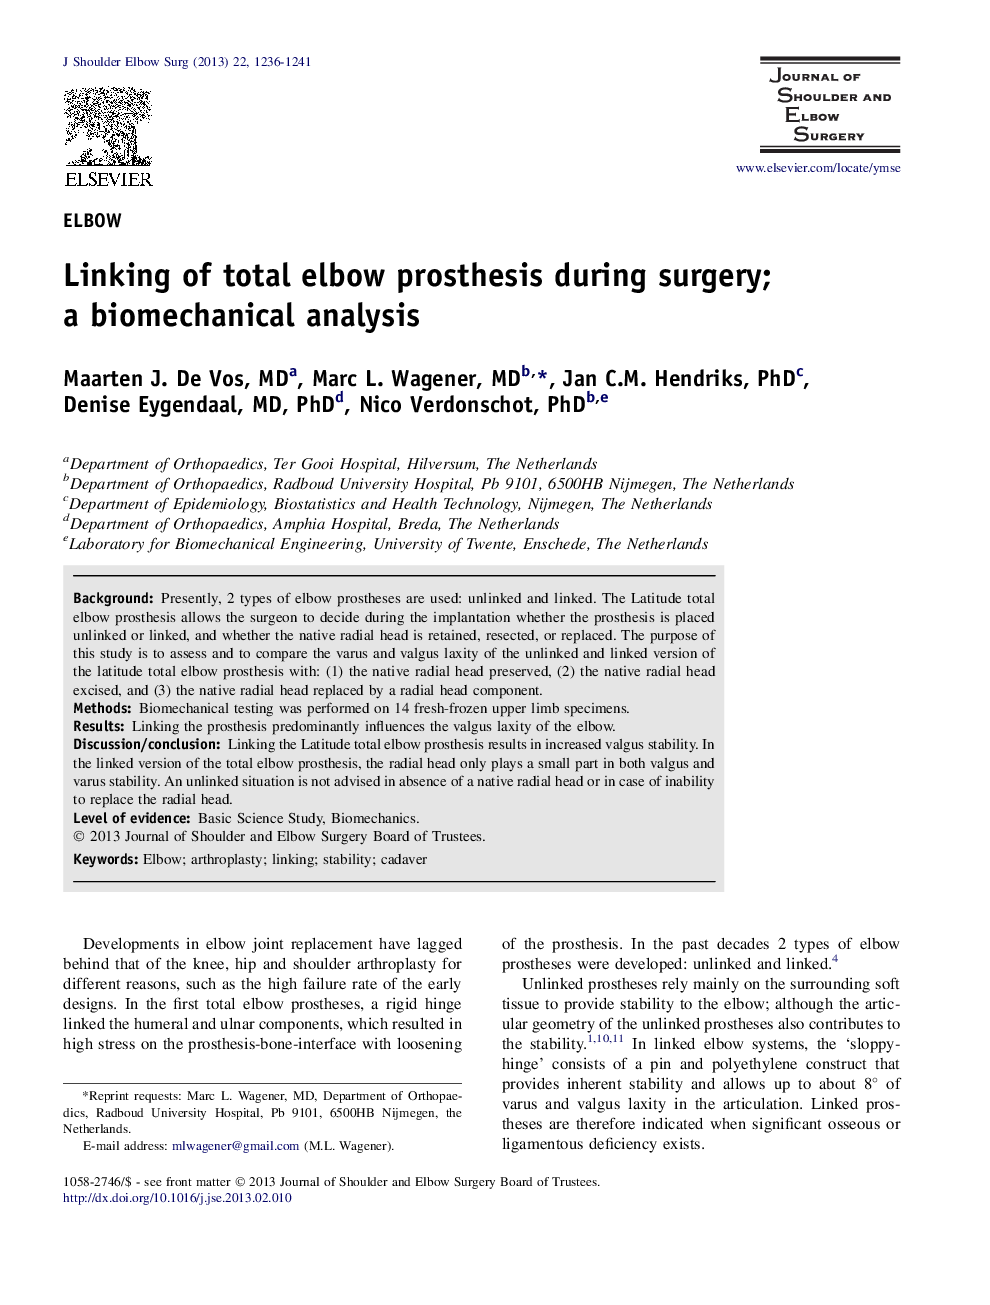 Linking of total elbow prosthesis during surgery; a biomechanical analysis